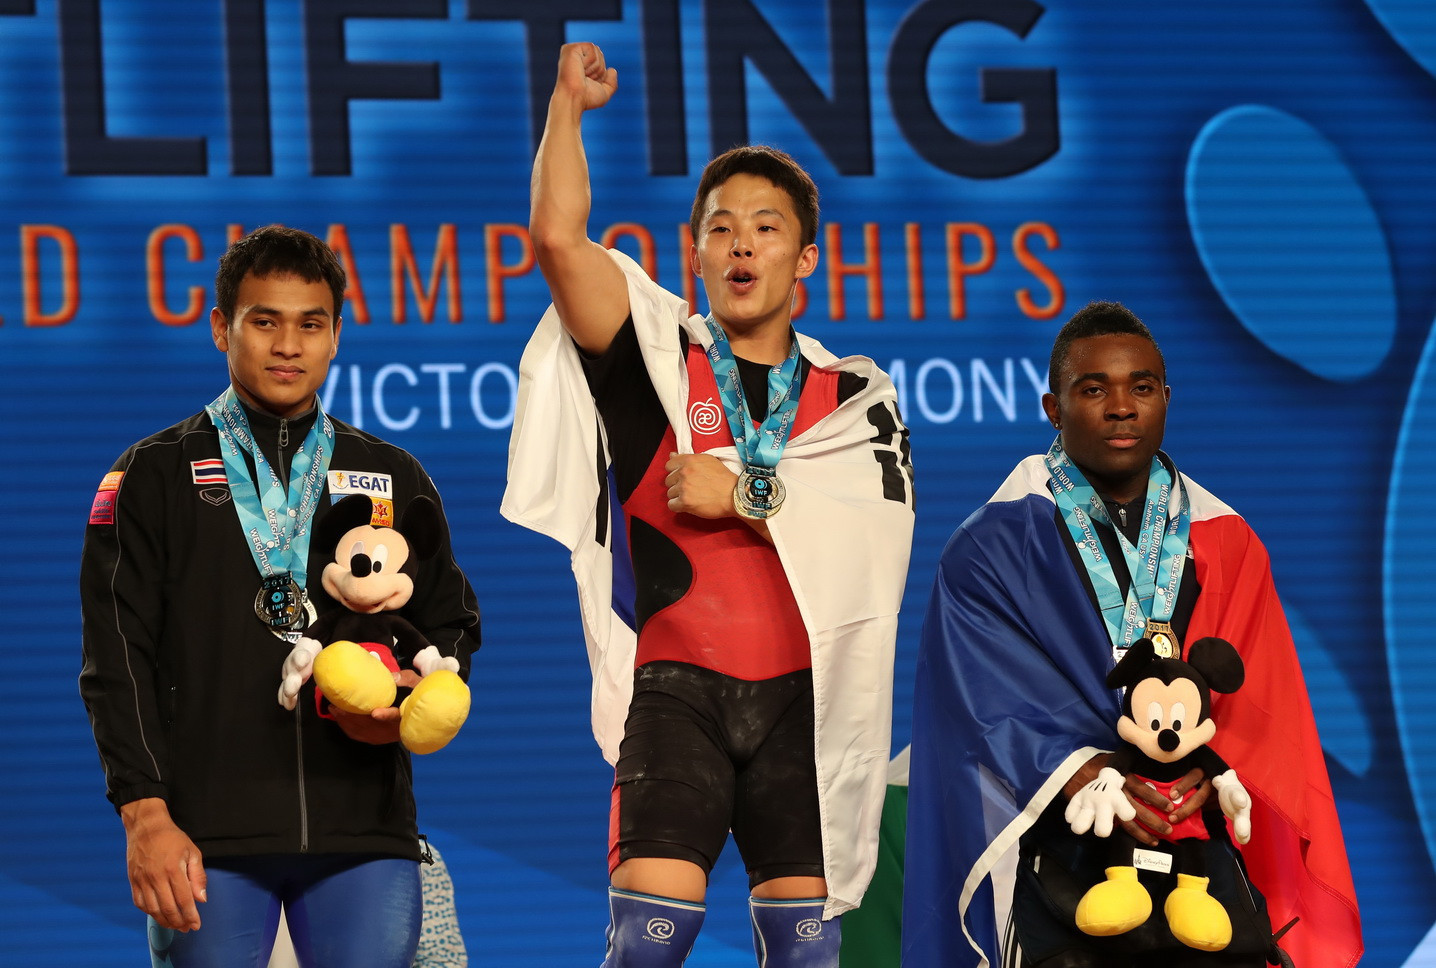 South Korea's Won claims men's 69kg title as home hope Cummings Jr bombs out at 2017 IWF World Championships